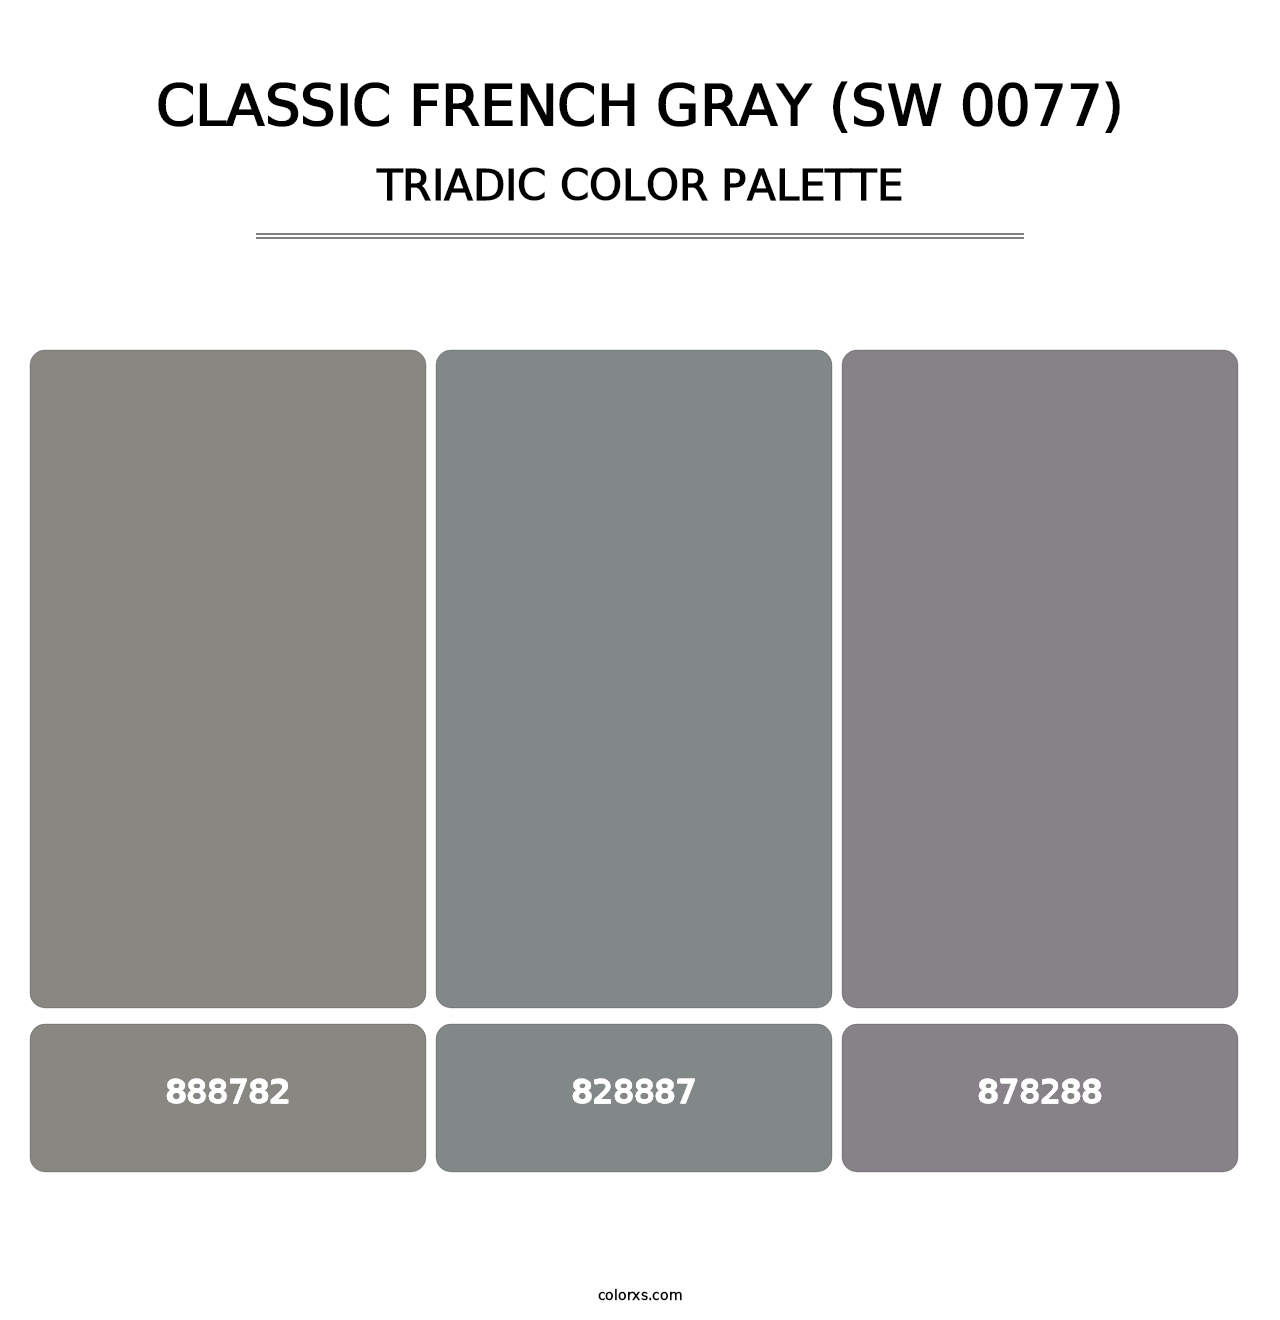 Classic French Gray (SW 0077) - Triadic Color Palette